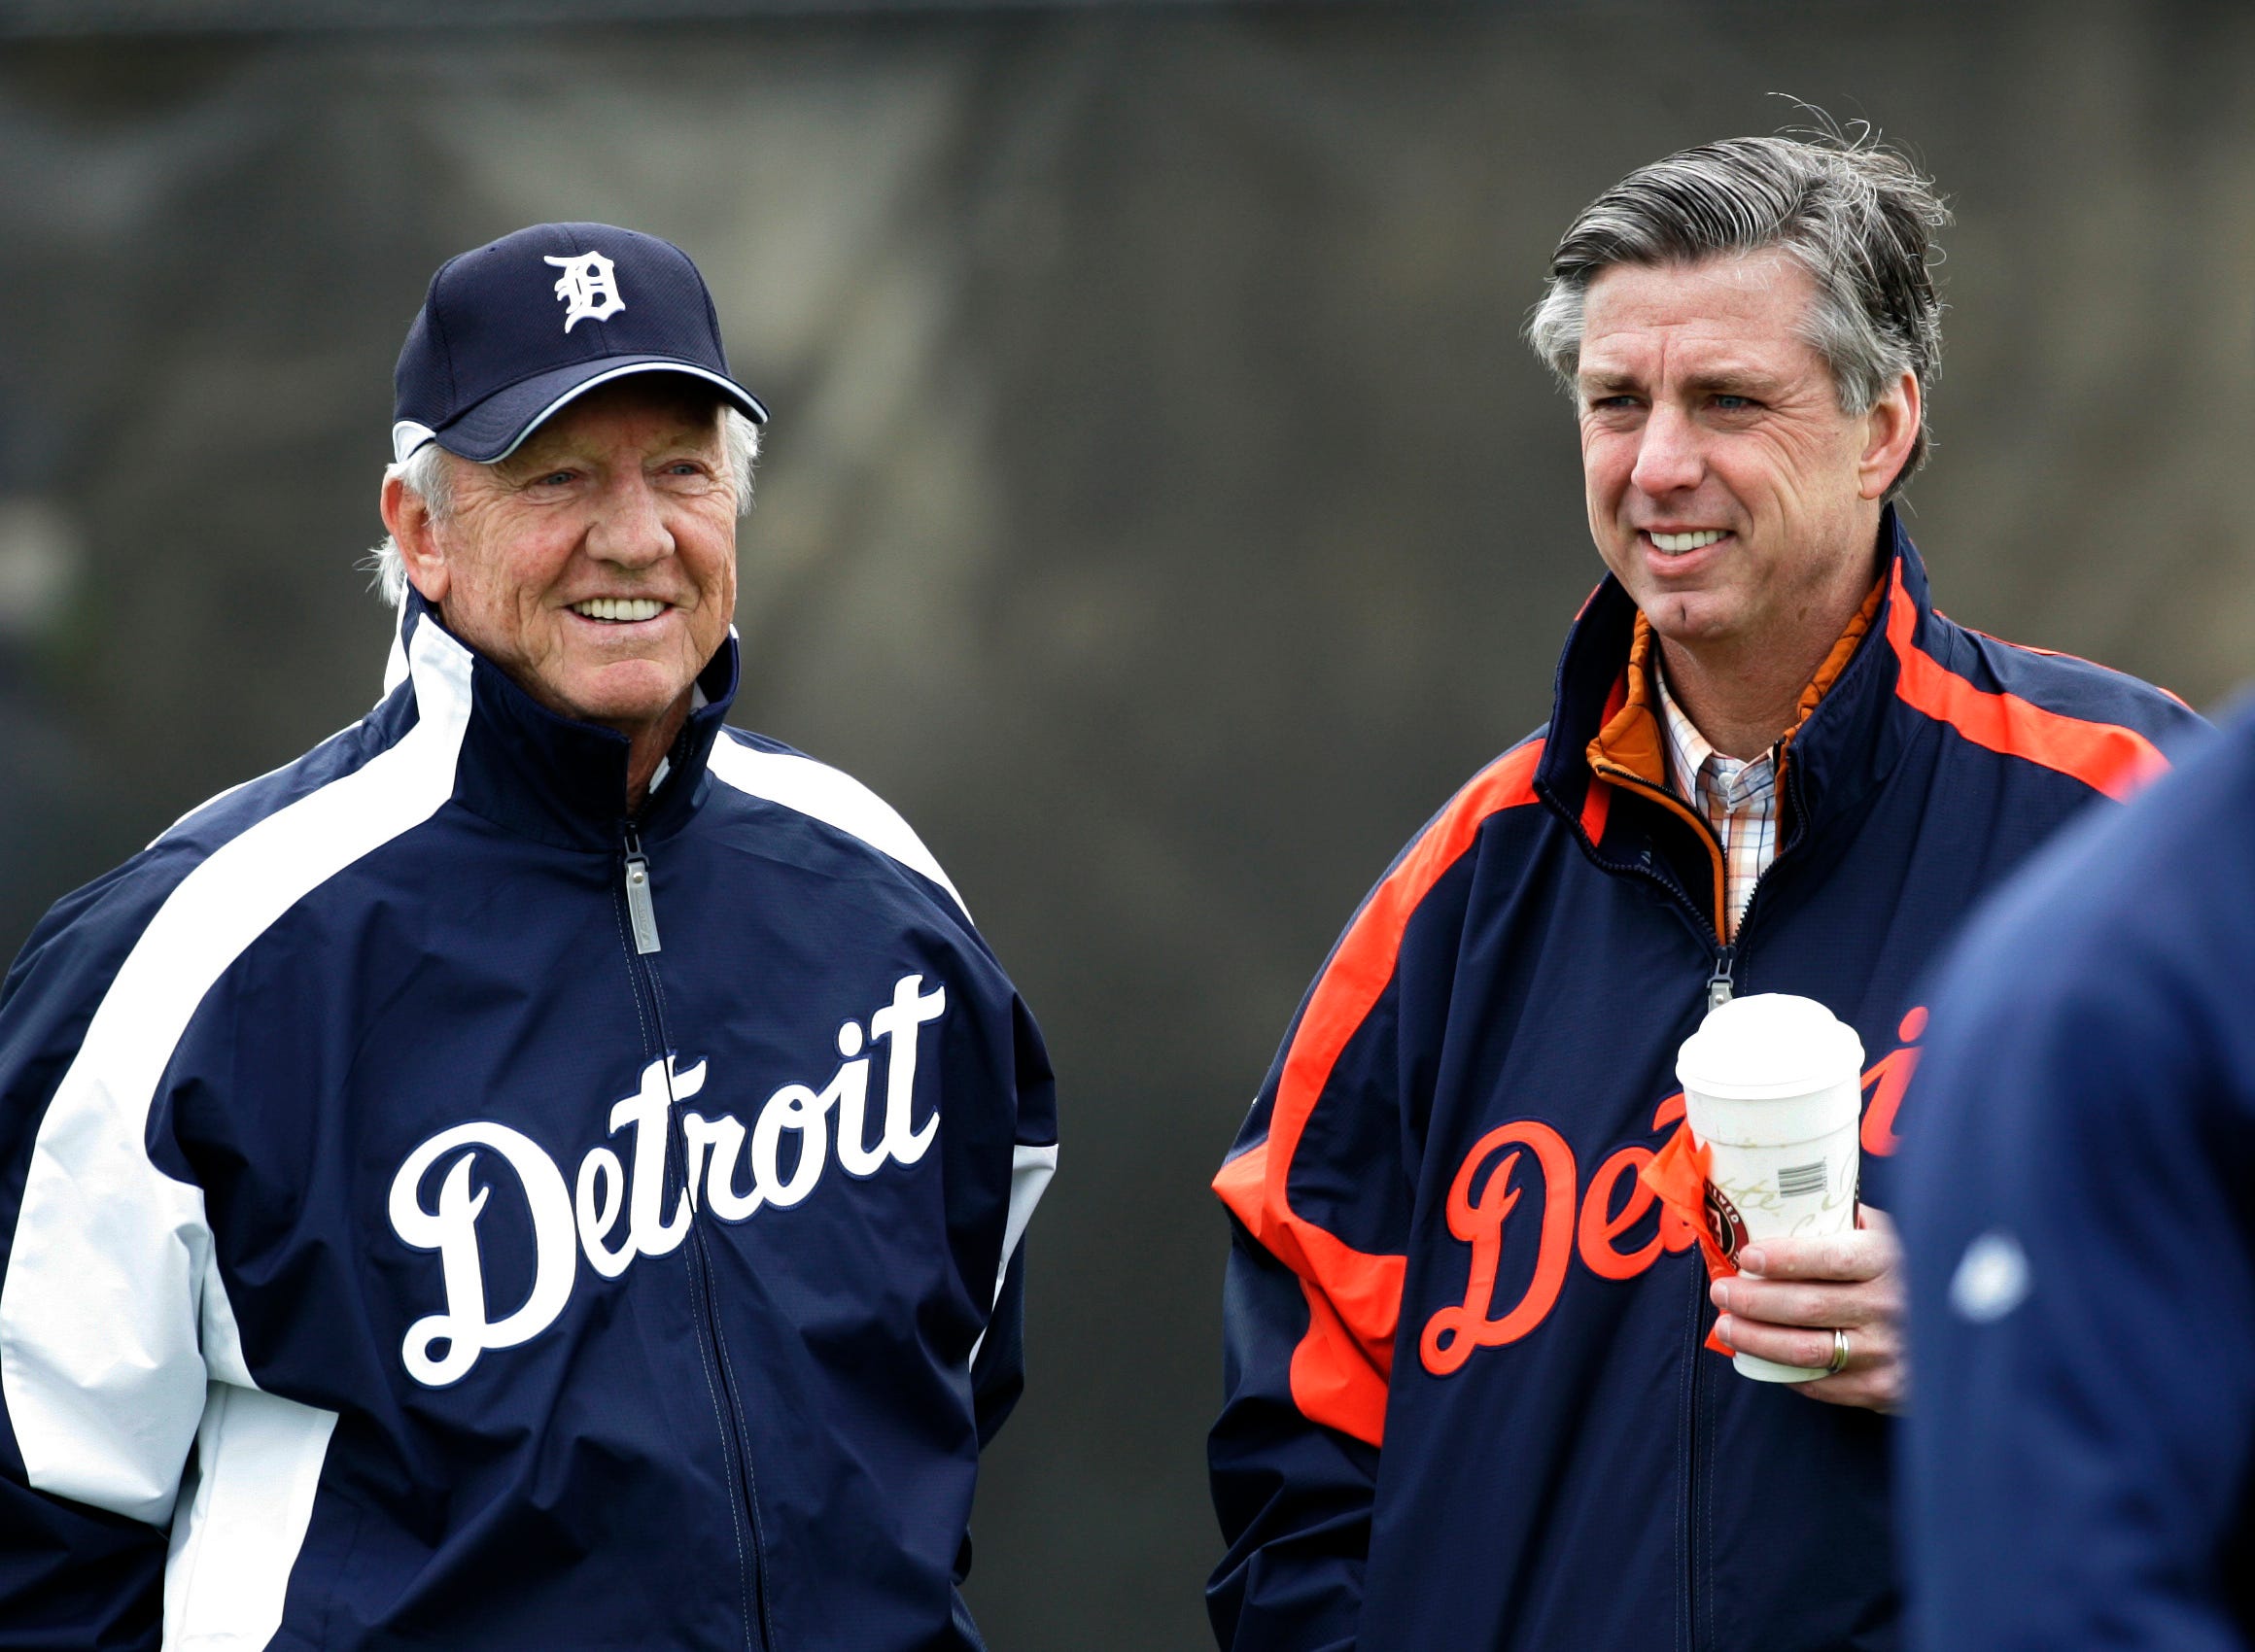 Detroit Tigers hall of famer Al Kaline (left) and Tigers general manager Dave Dombroski watch Detroit Tigers players warm up on a cold day at spring training in Lakeland, Florida on February 16, 2007.